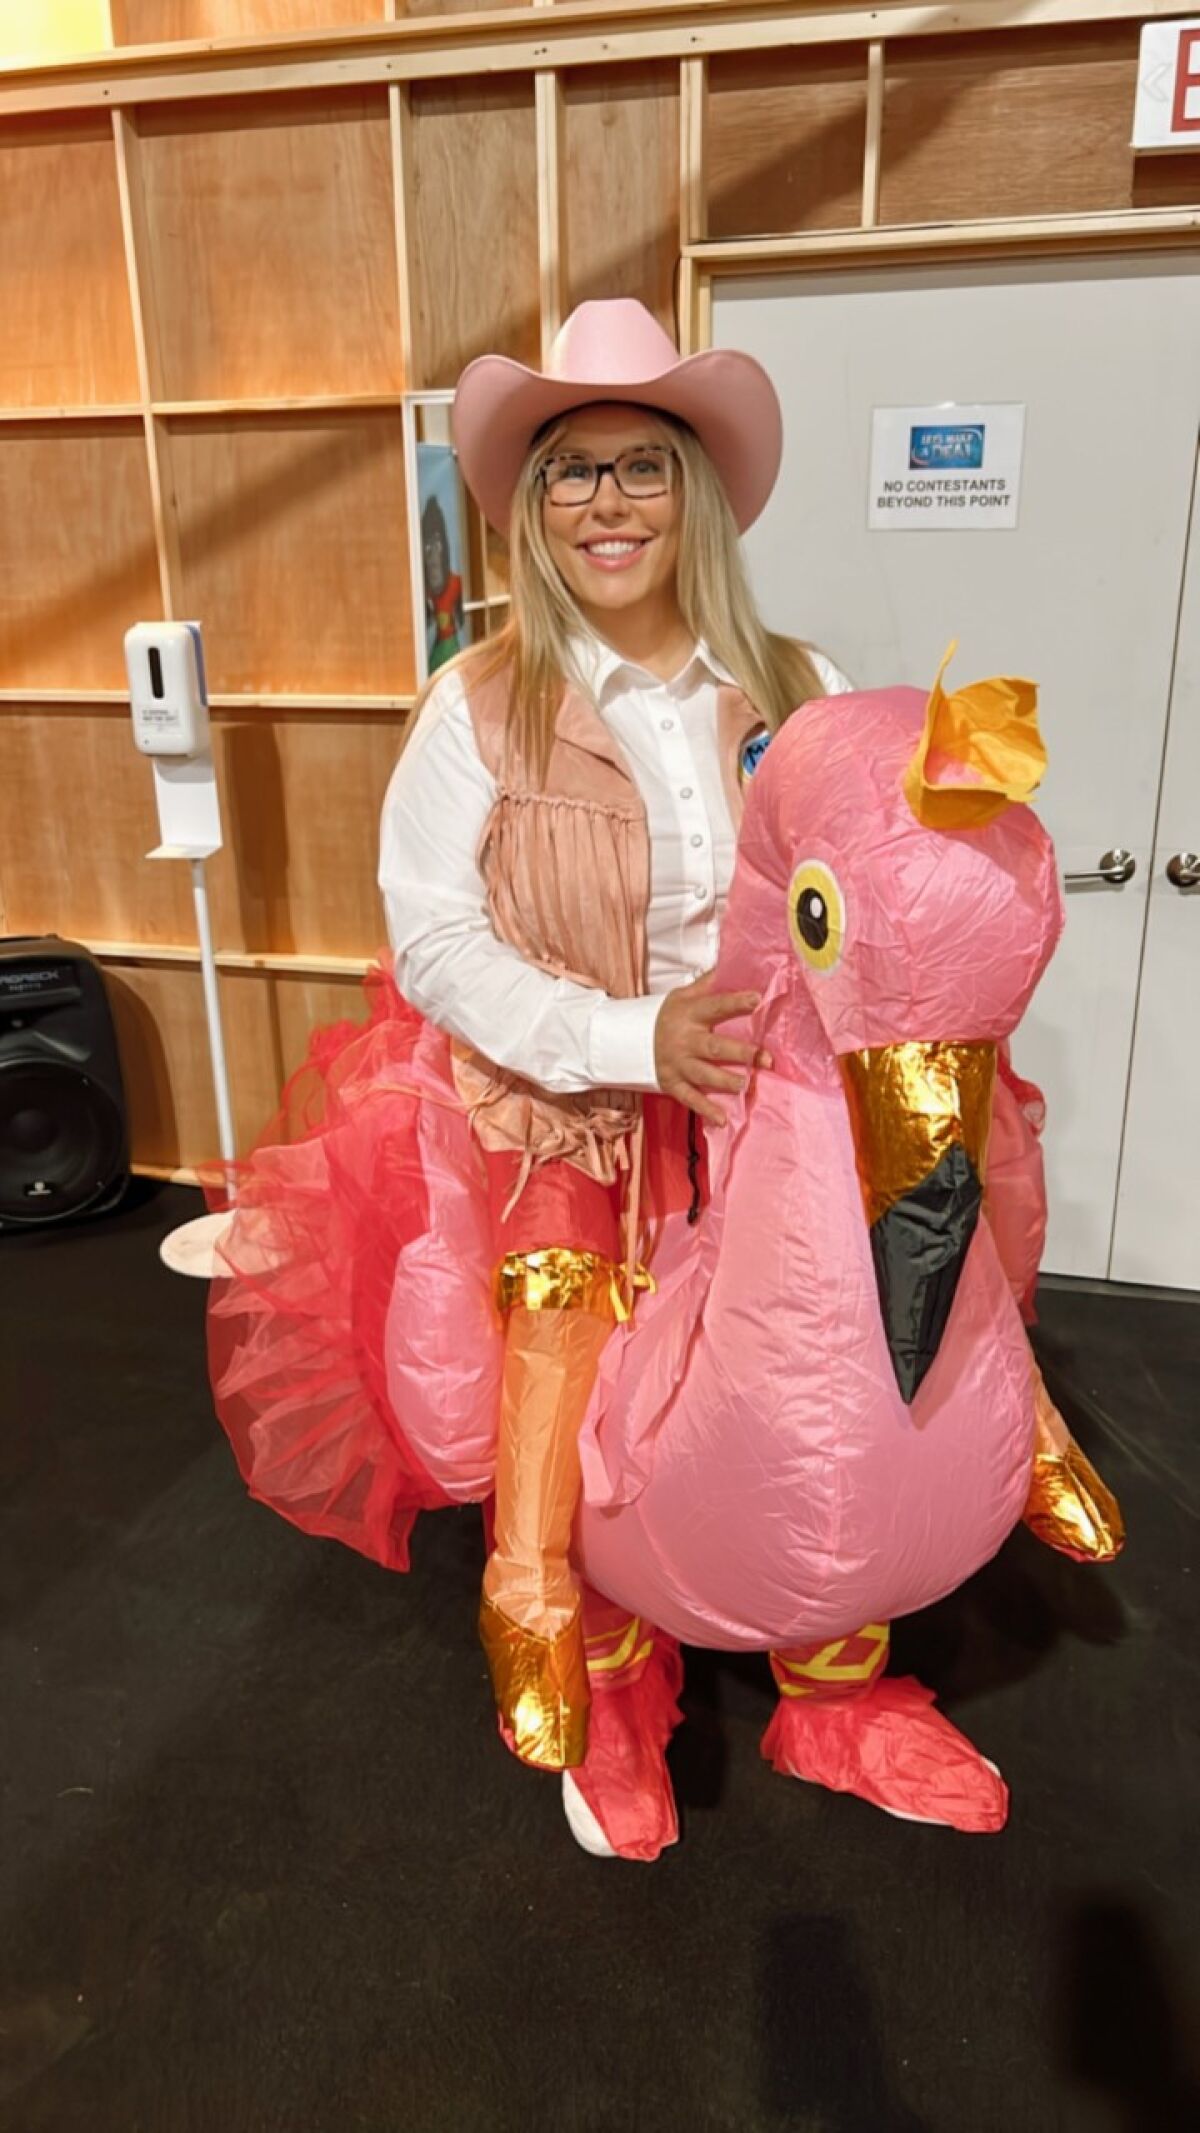 Melissa Huk of Poway in her costume for "Let's Make a Deal."